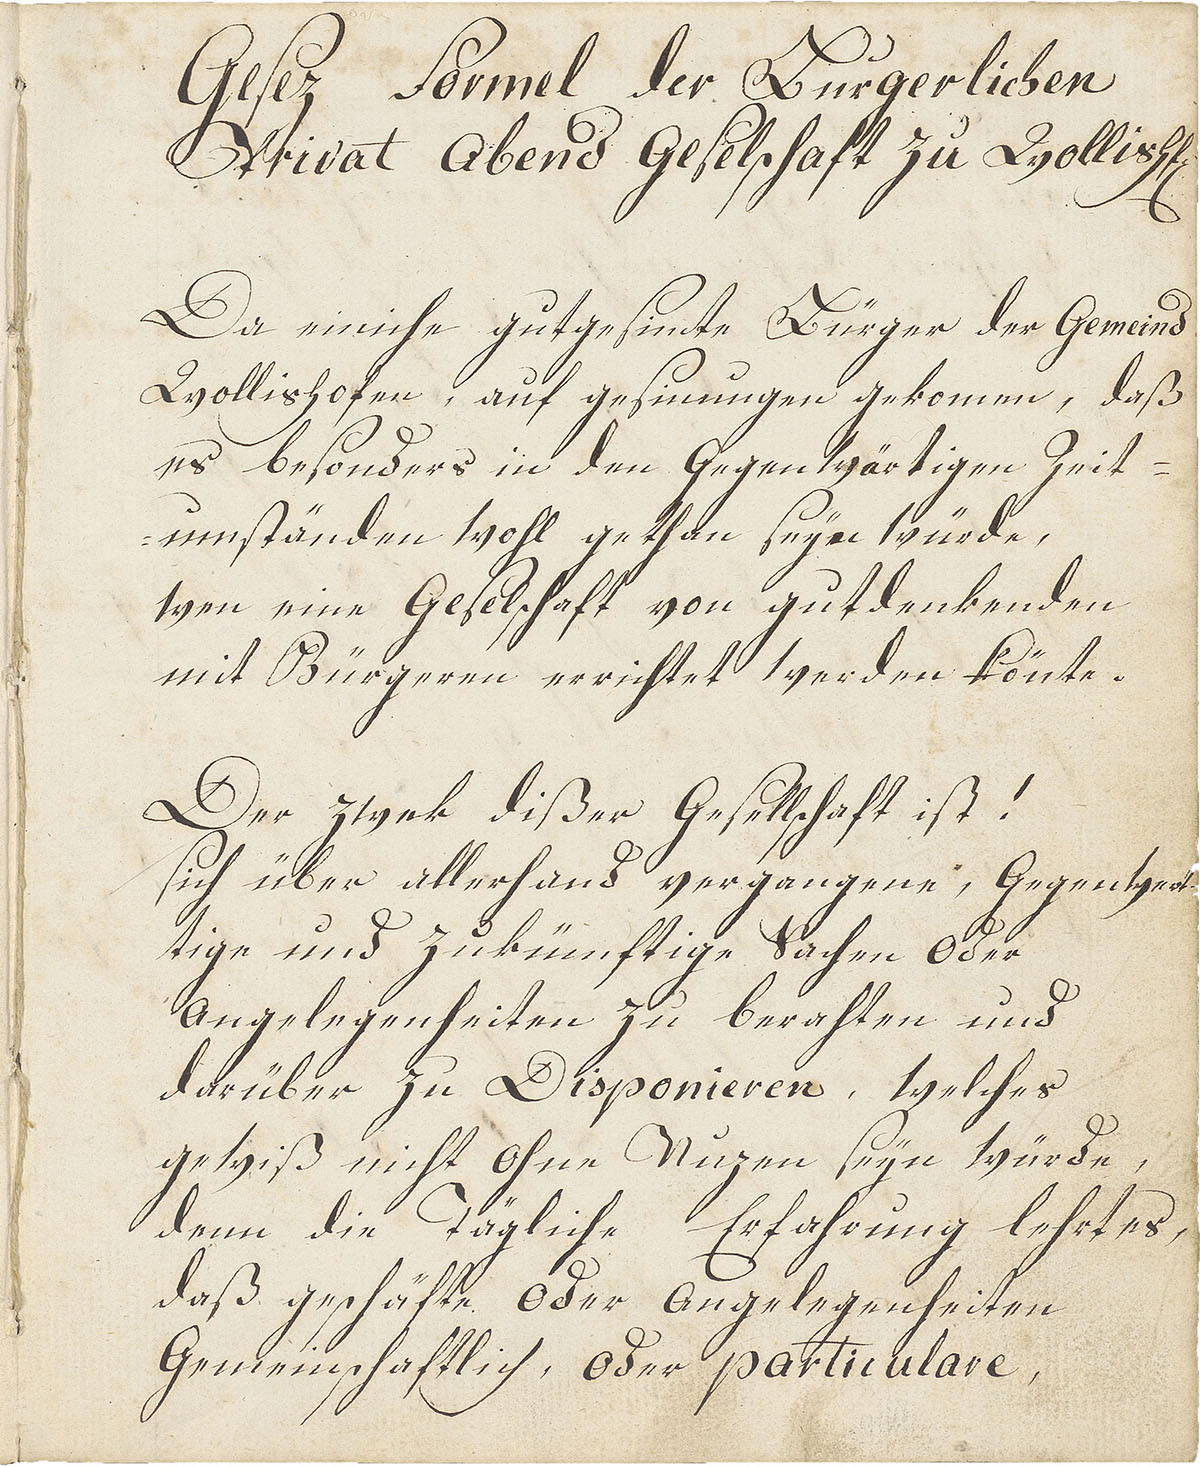 The first page of the «Gesez Formel der burgerlichen Privat Abend Geselschaft zu Wollish» dated 1798. It is located in the corporation archive of the Wollishofen Reading Society in the Manuscript Department of the Zentralbibliothek Zürich (image: ZB Zürich)